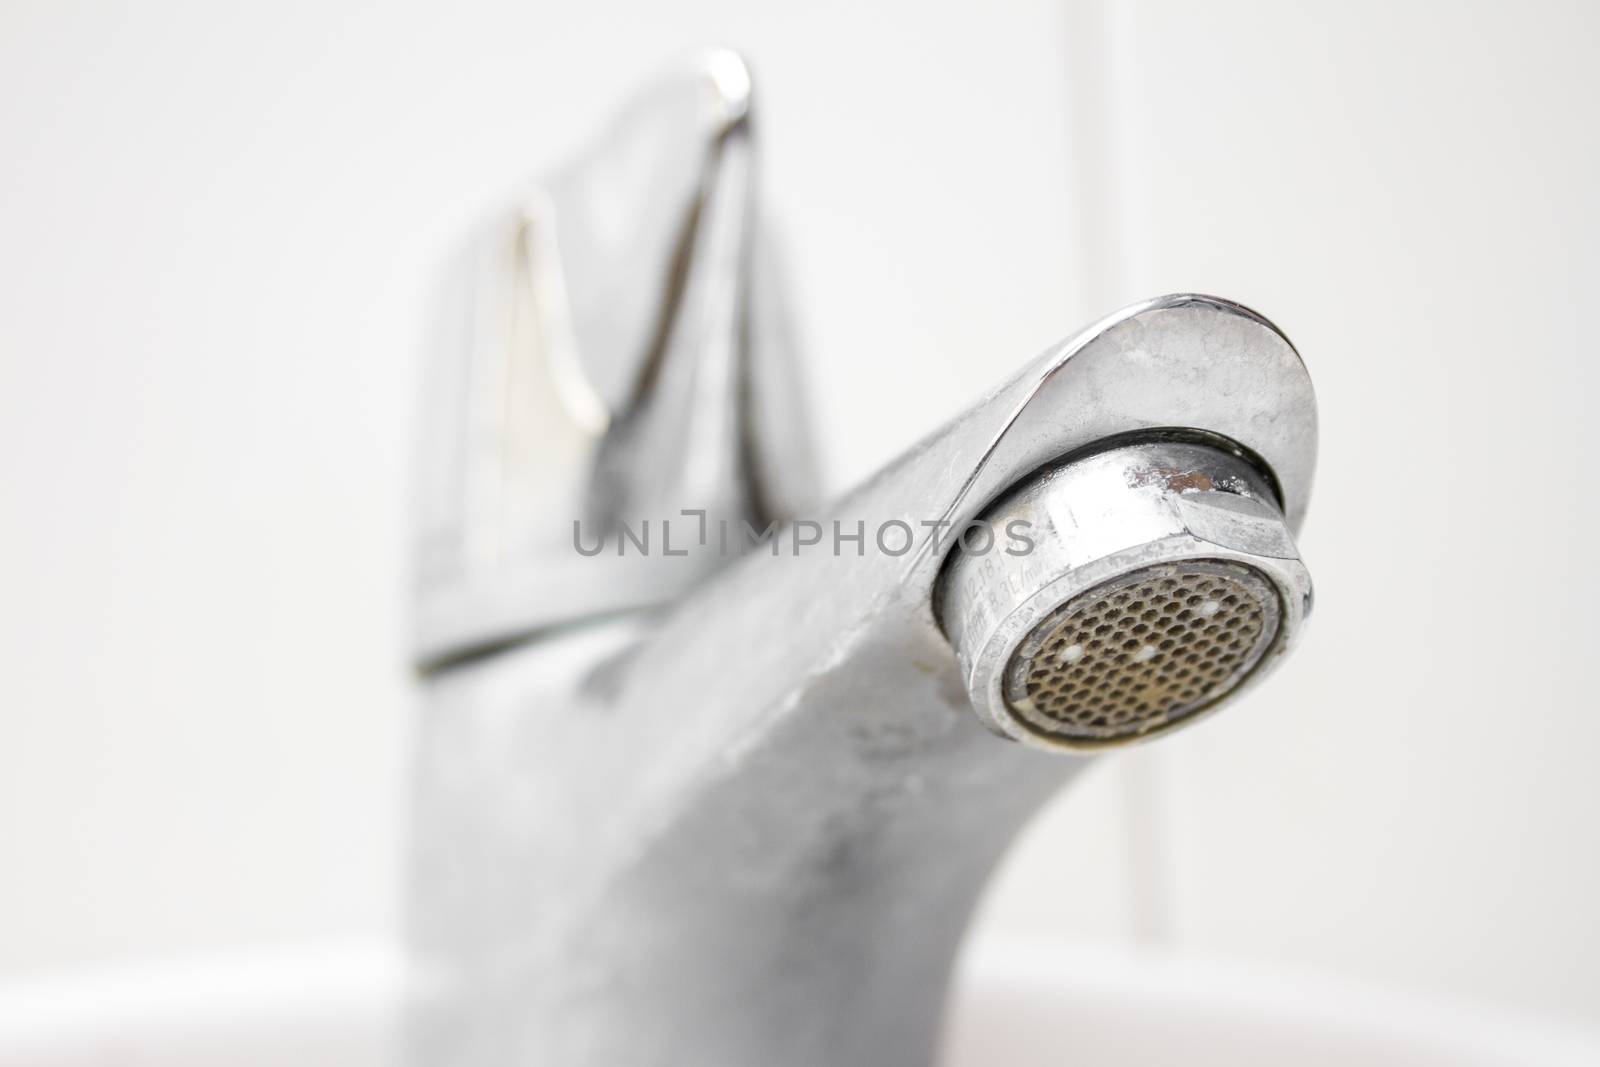 Modern style dirty faucet, small depth of field by kasinv